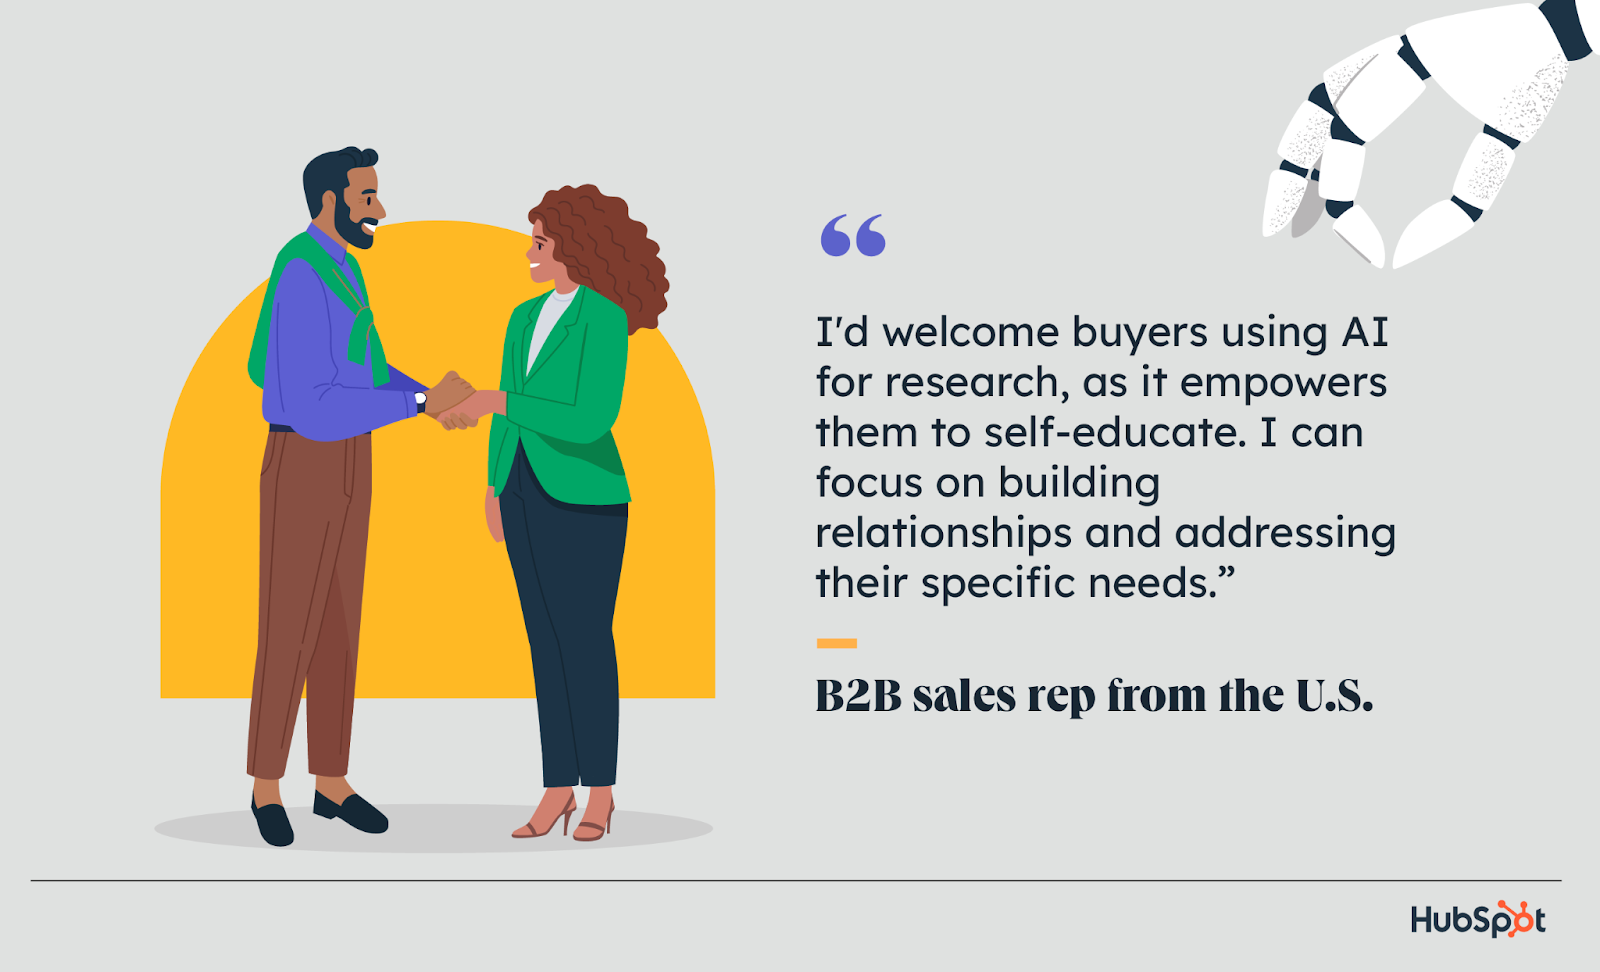 quote from B2B sales rep